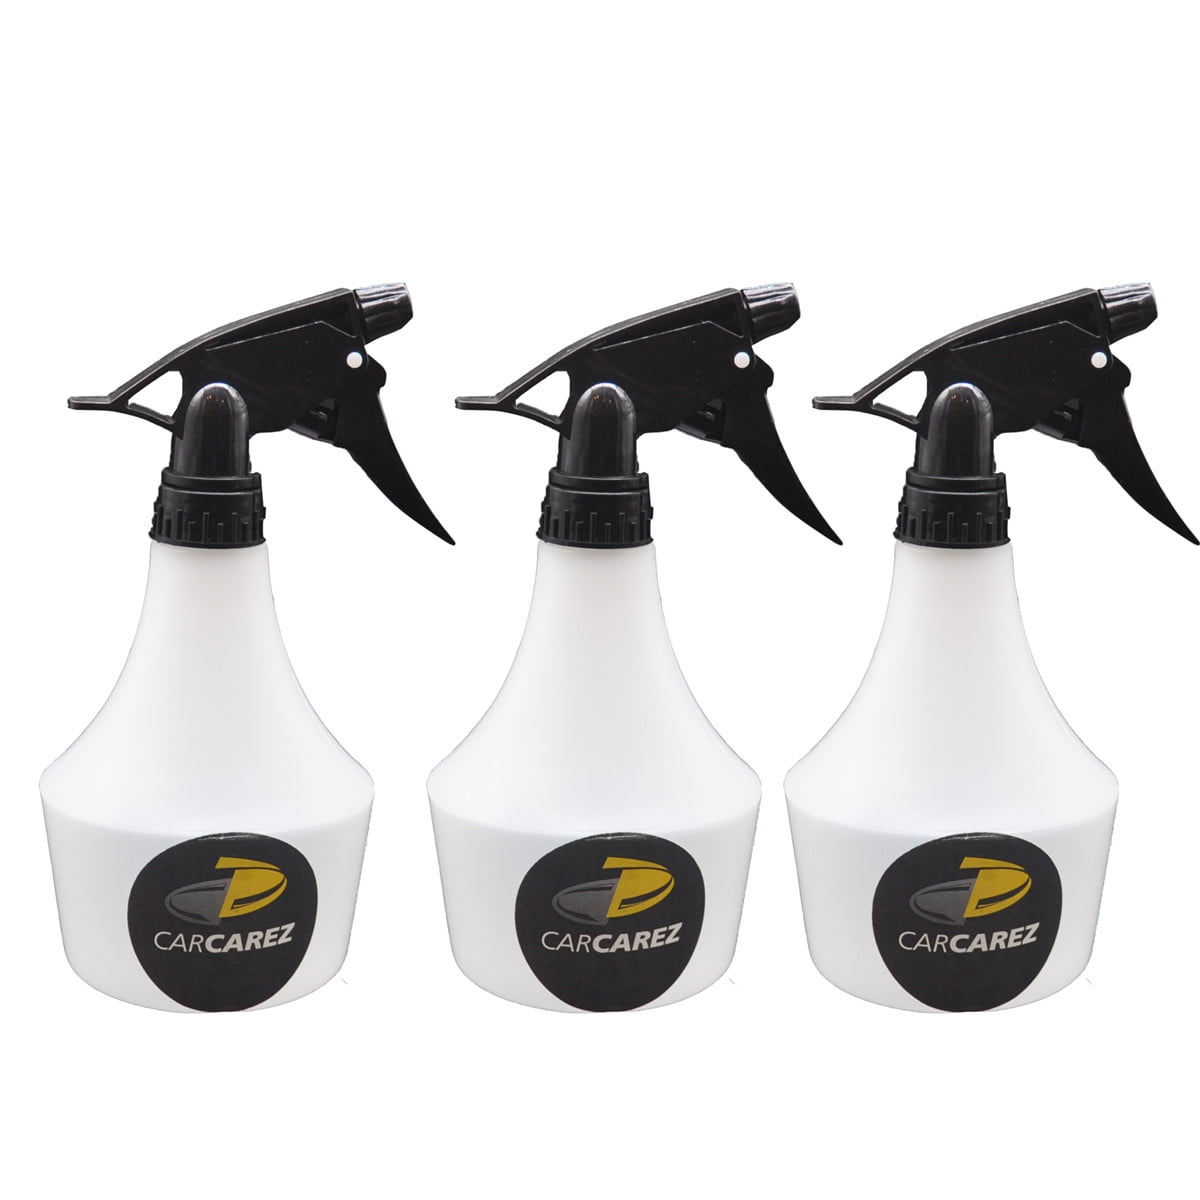  SPRAYZ Large 16oz Spray Bottles For Cleaning and